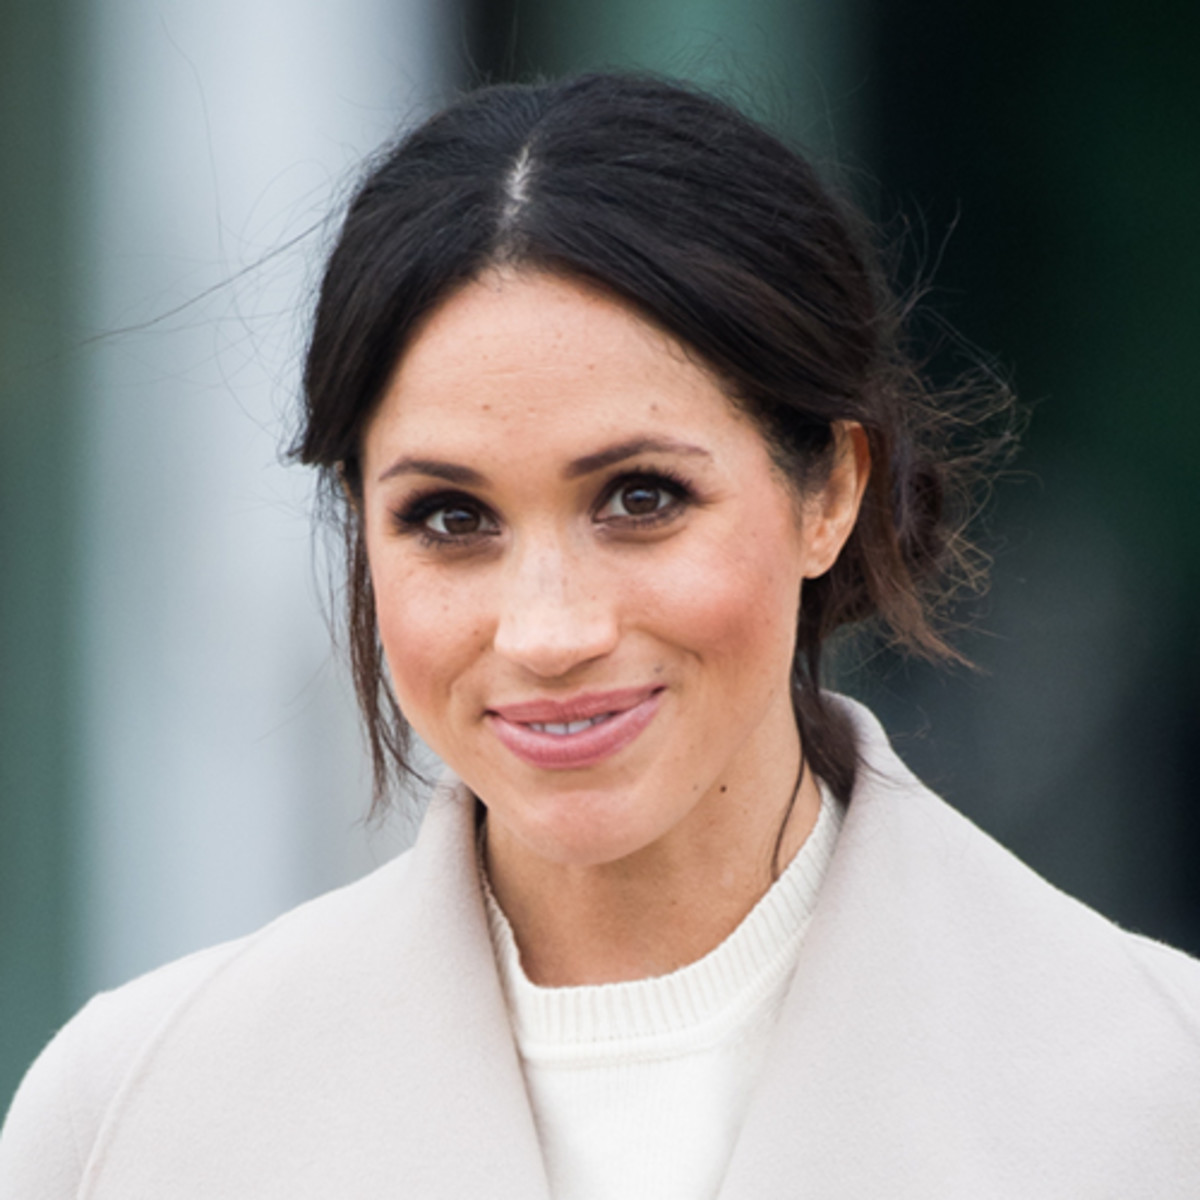 Meghan Markle Get Voiceover Deal With Disney